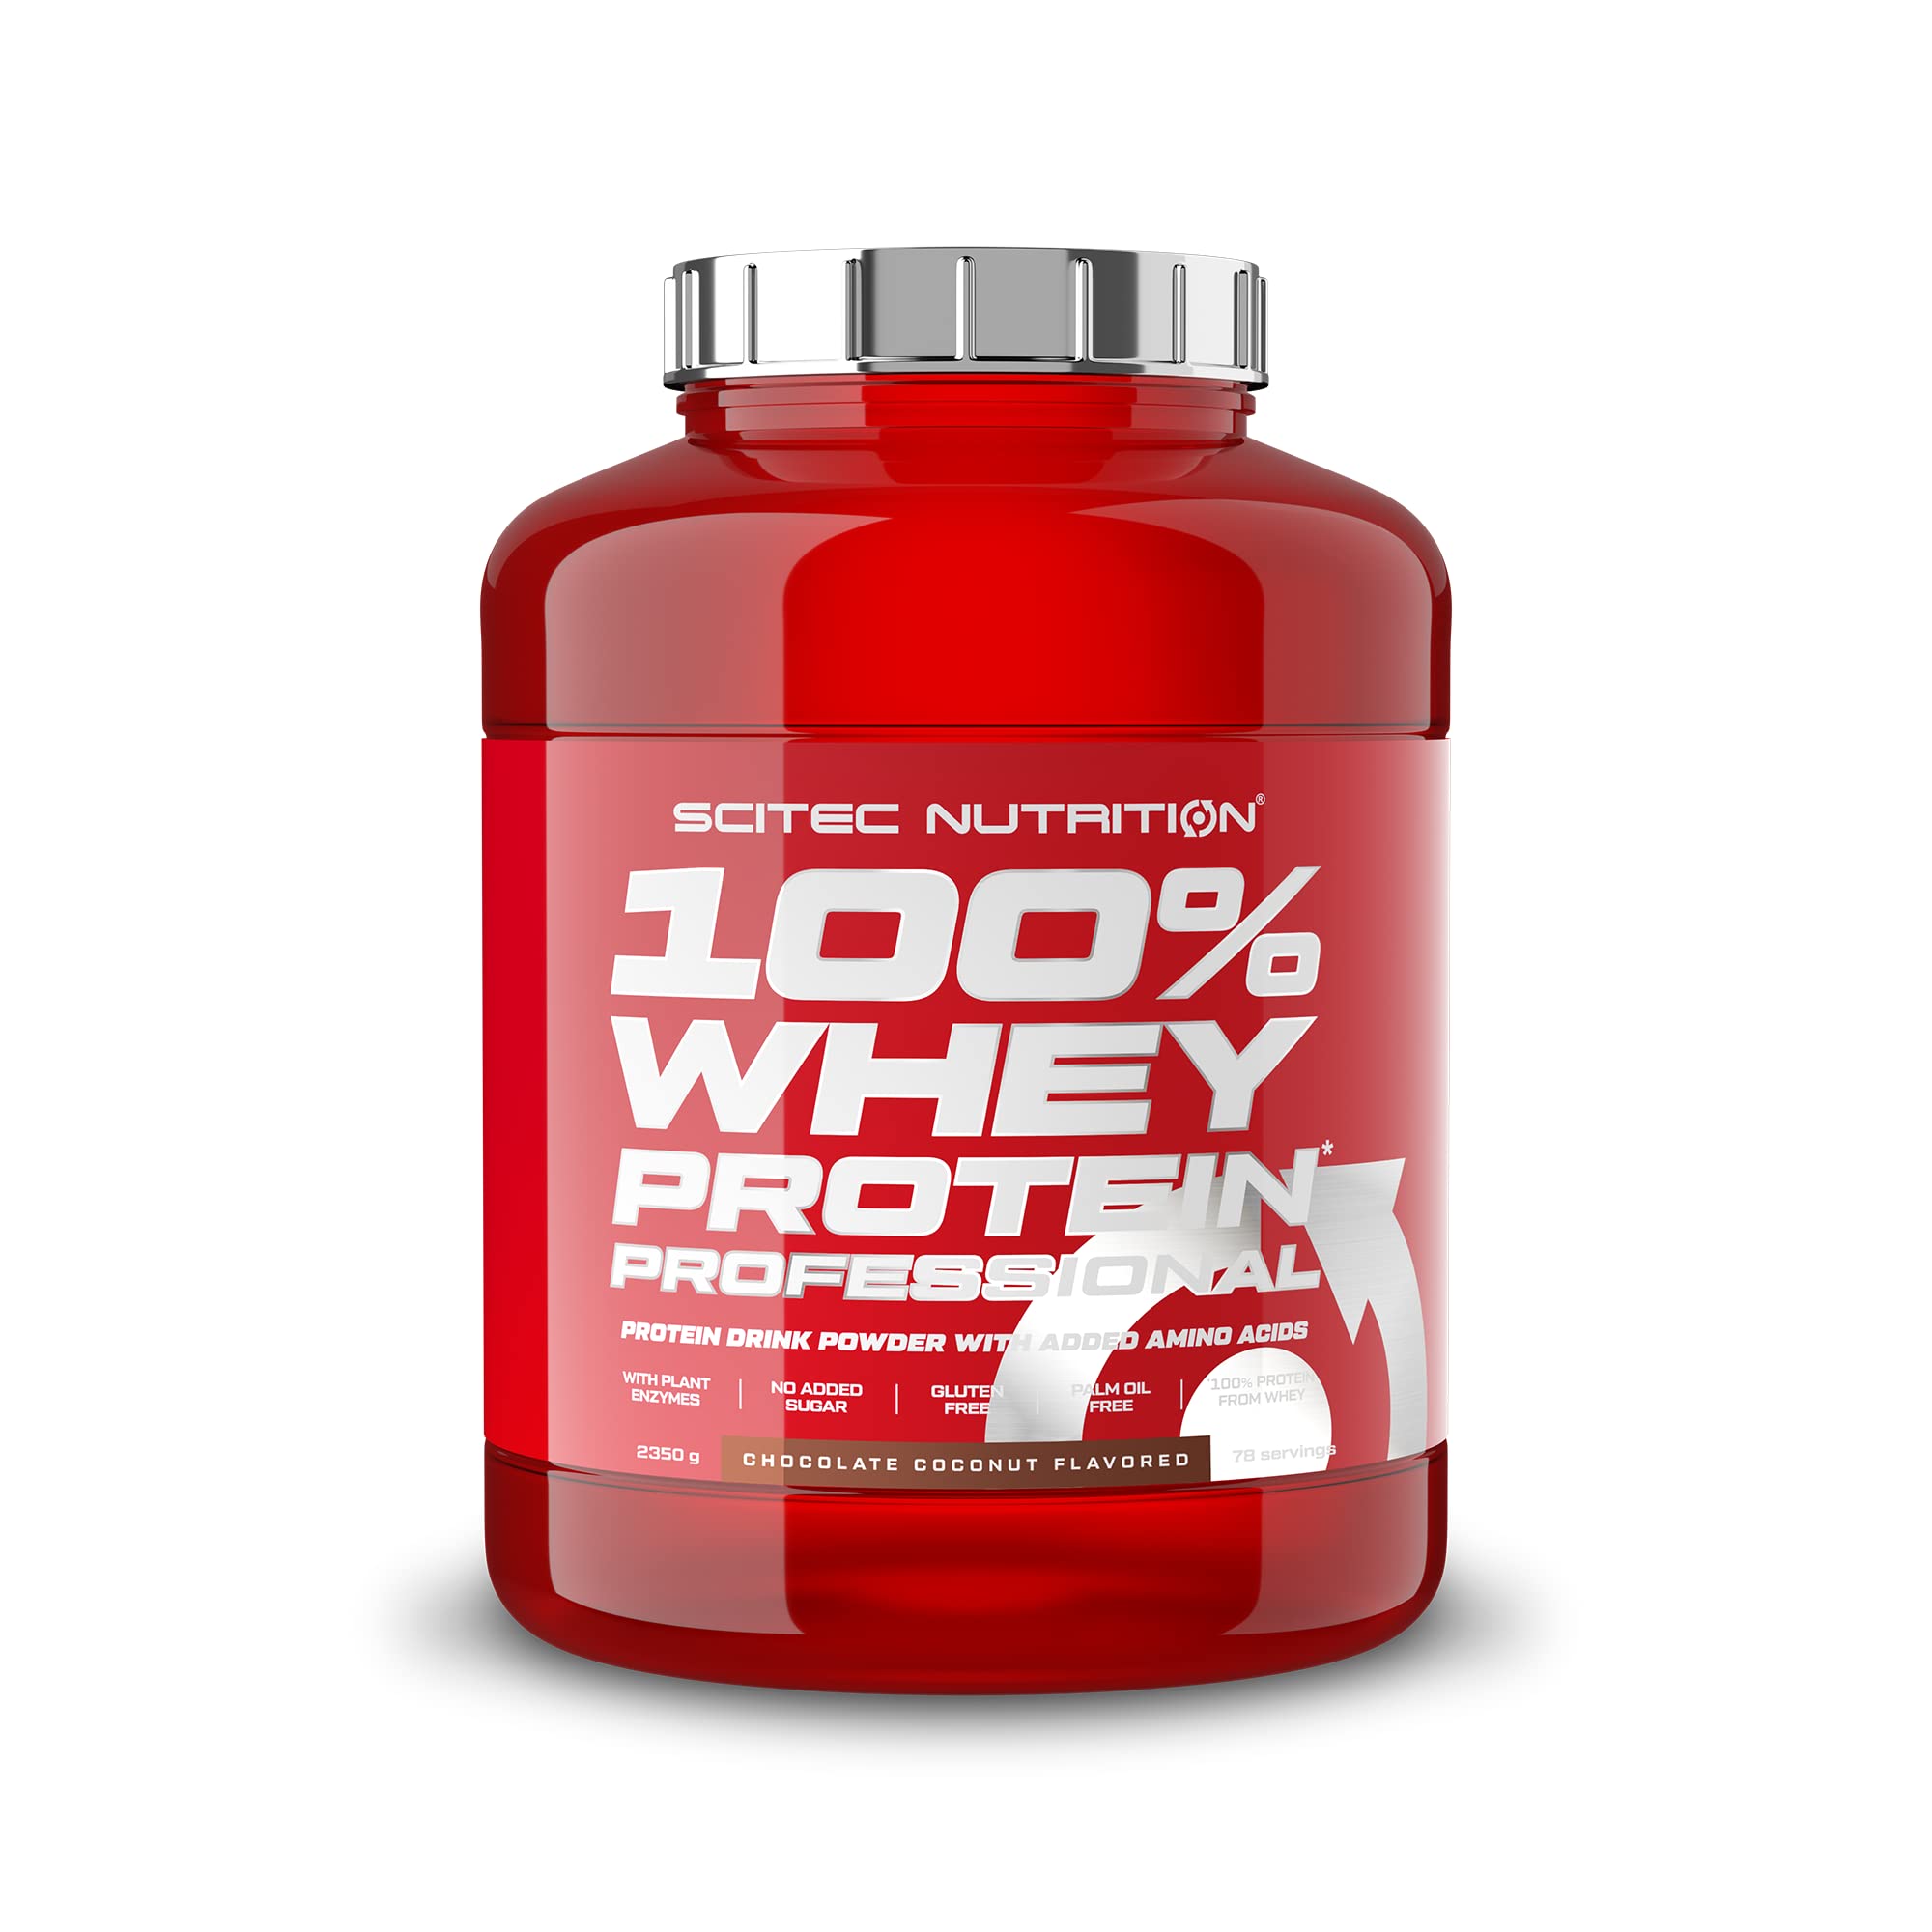 Scitec Nutrition 100% Whey Professional 2350g Chocolate Coconut Protein Supplement